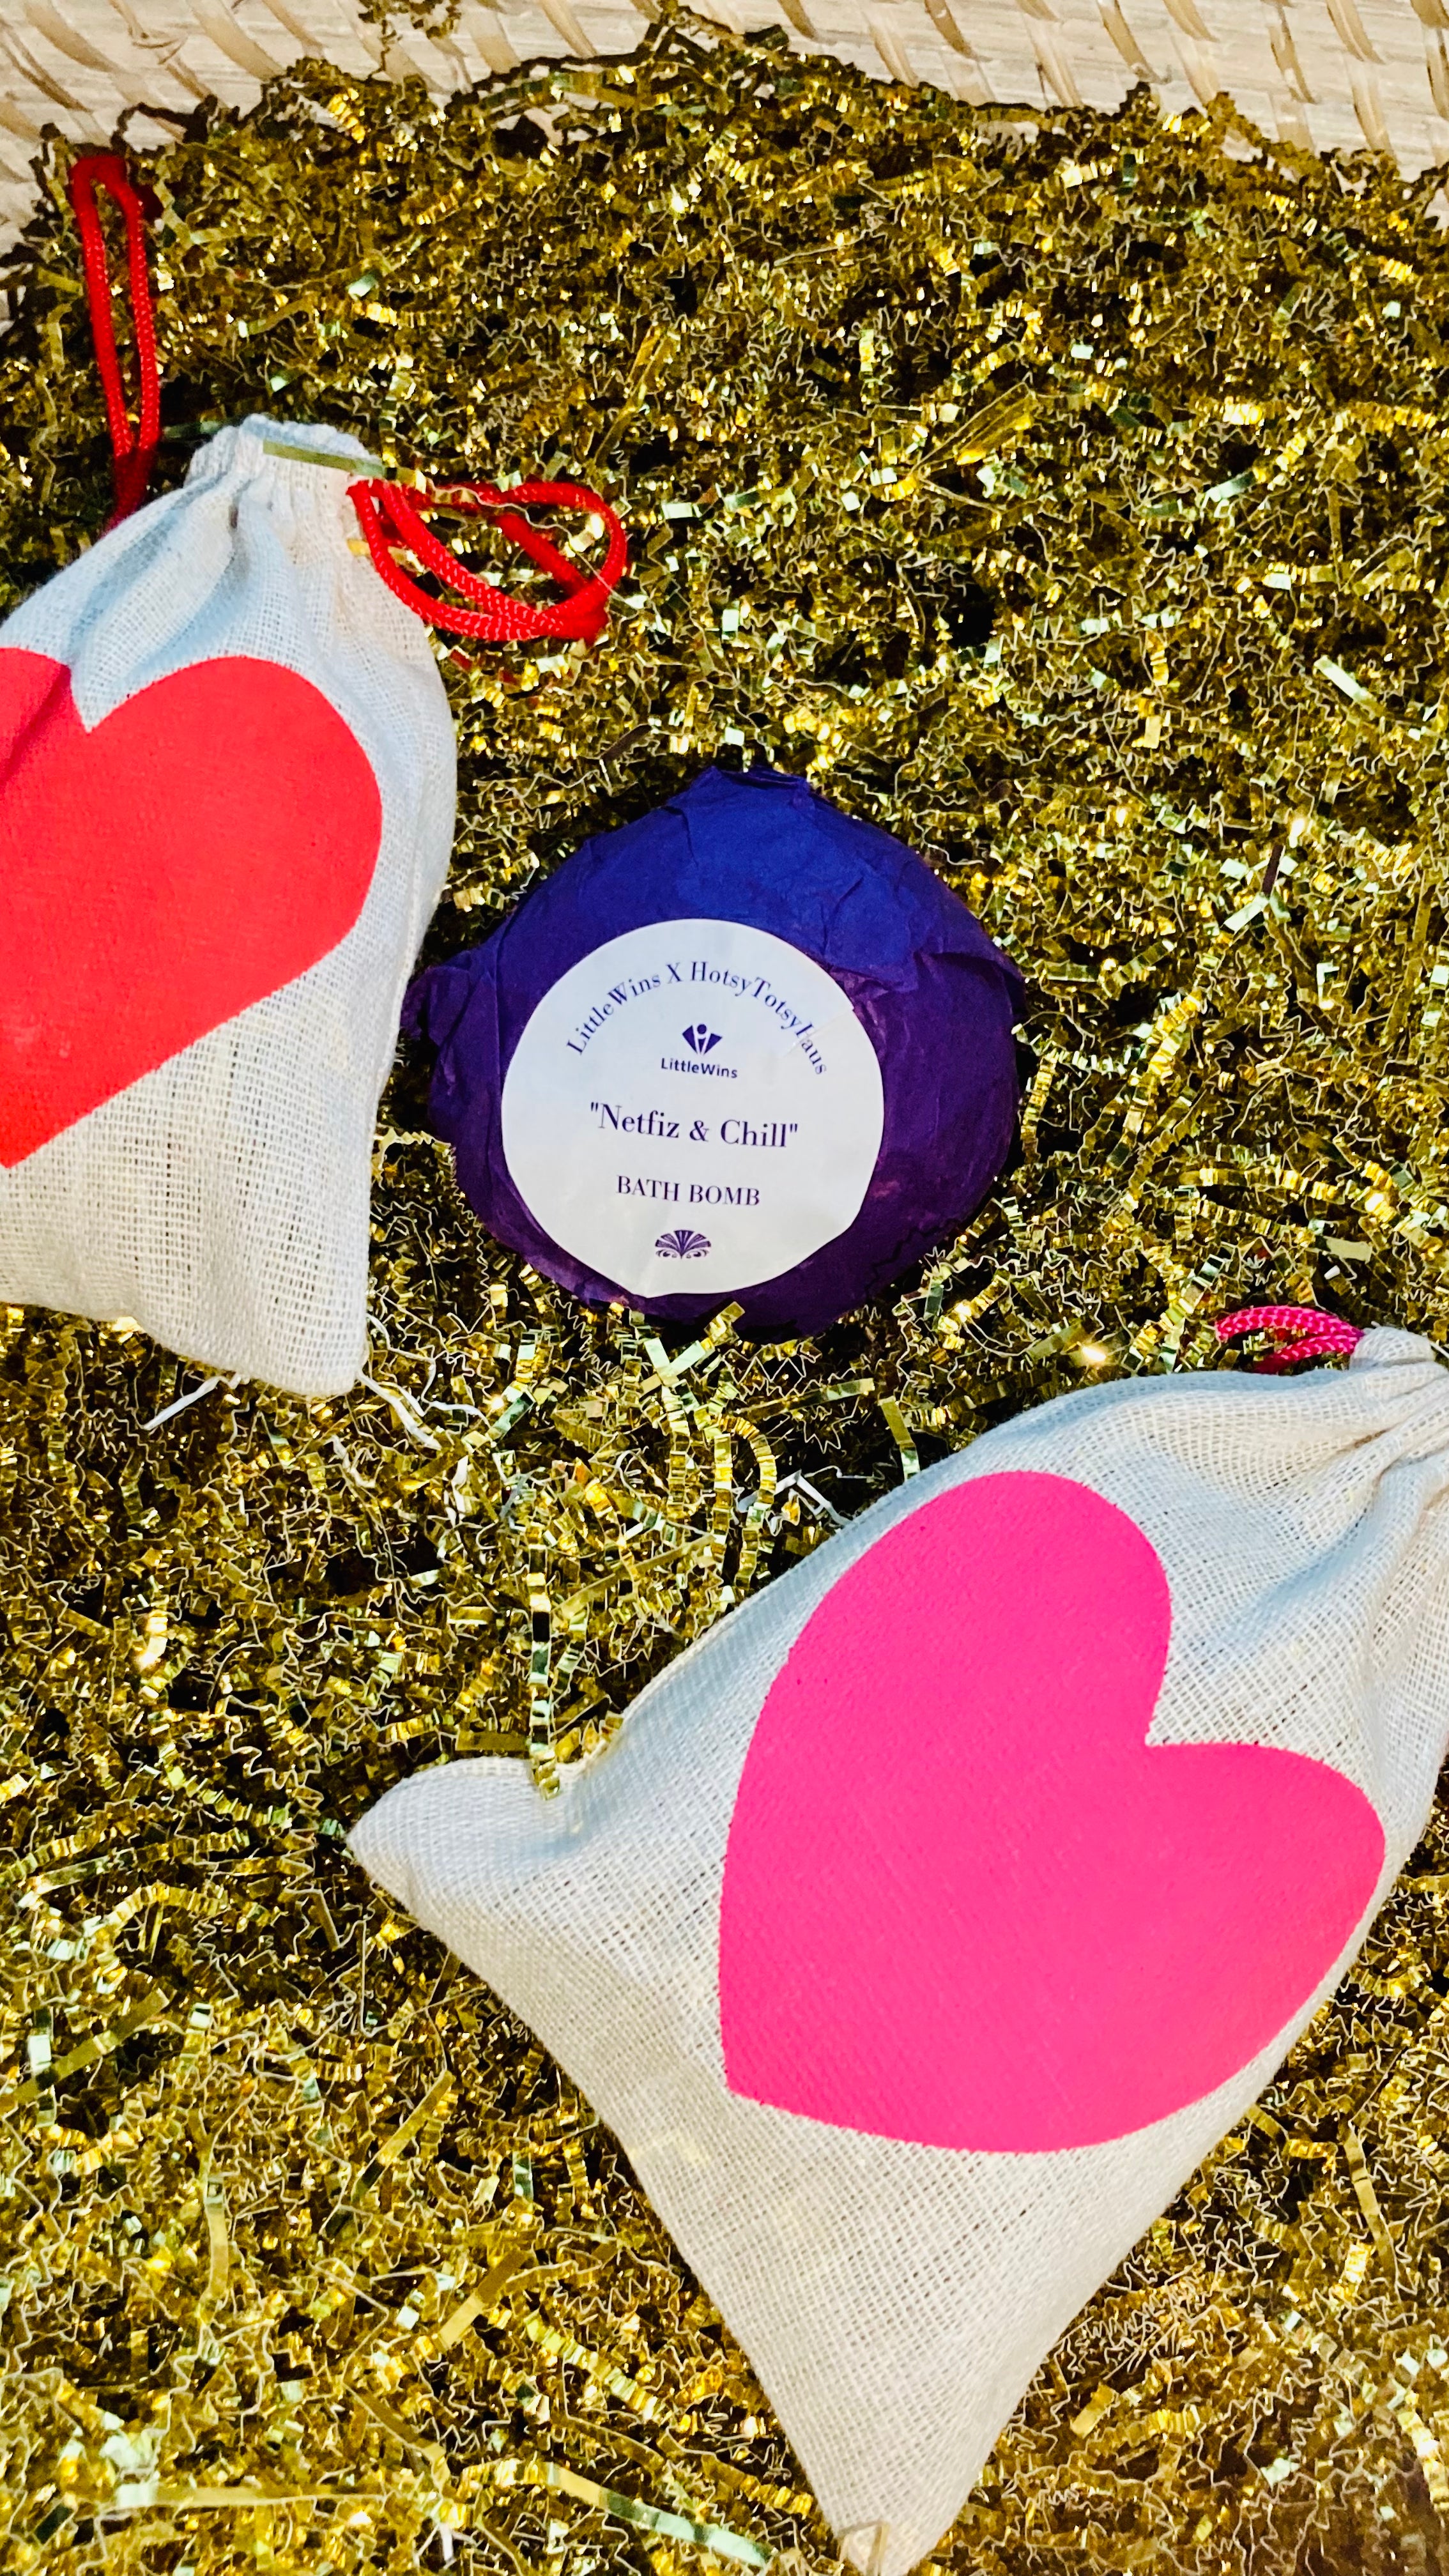 FOR THE LOVE - Bath Bomb Gift Satchel